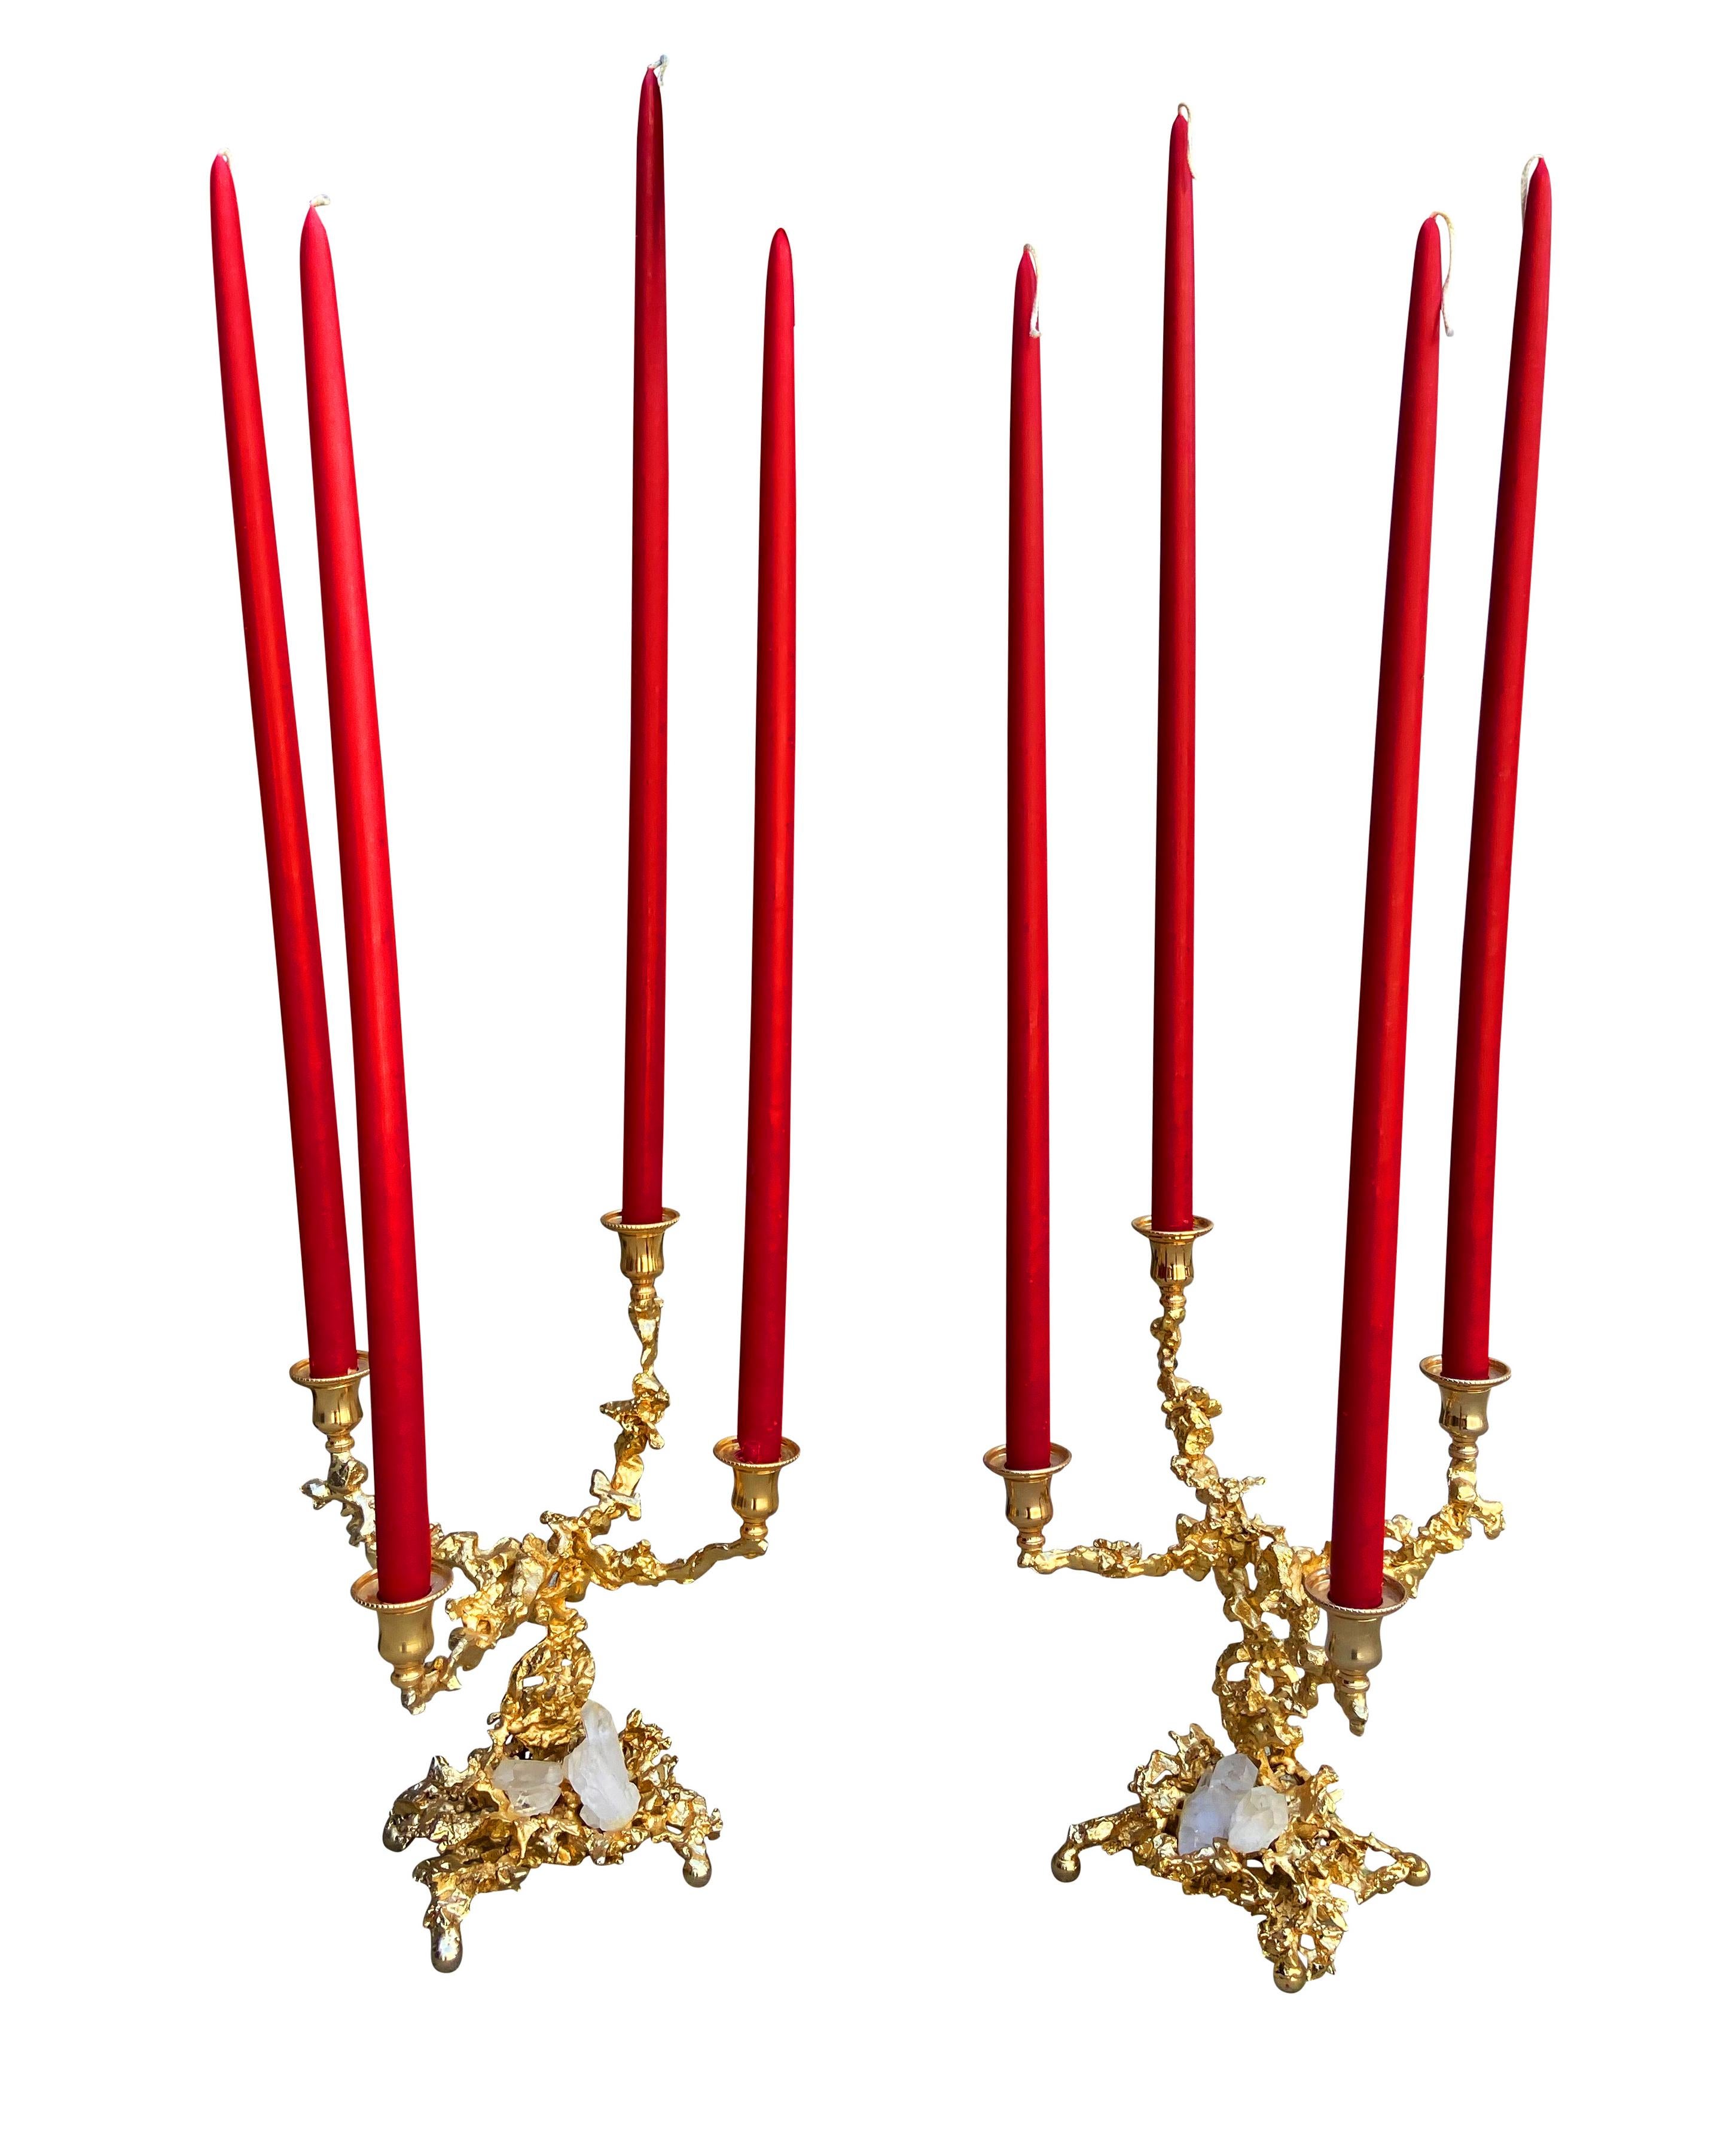 A stunning and classy pair of candlesticks handcrafted by Claude Boeltz in France, circa 1970s. These features hand-sculpted bronze structures, 24-karat gold-plated, and garnished with rock crystals. Artist marks to each. The price includes the pair